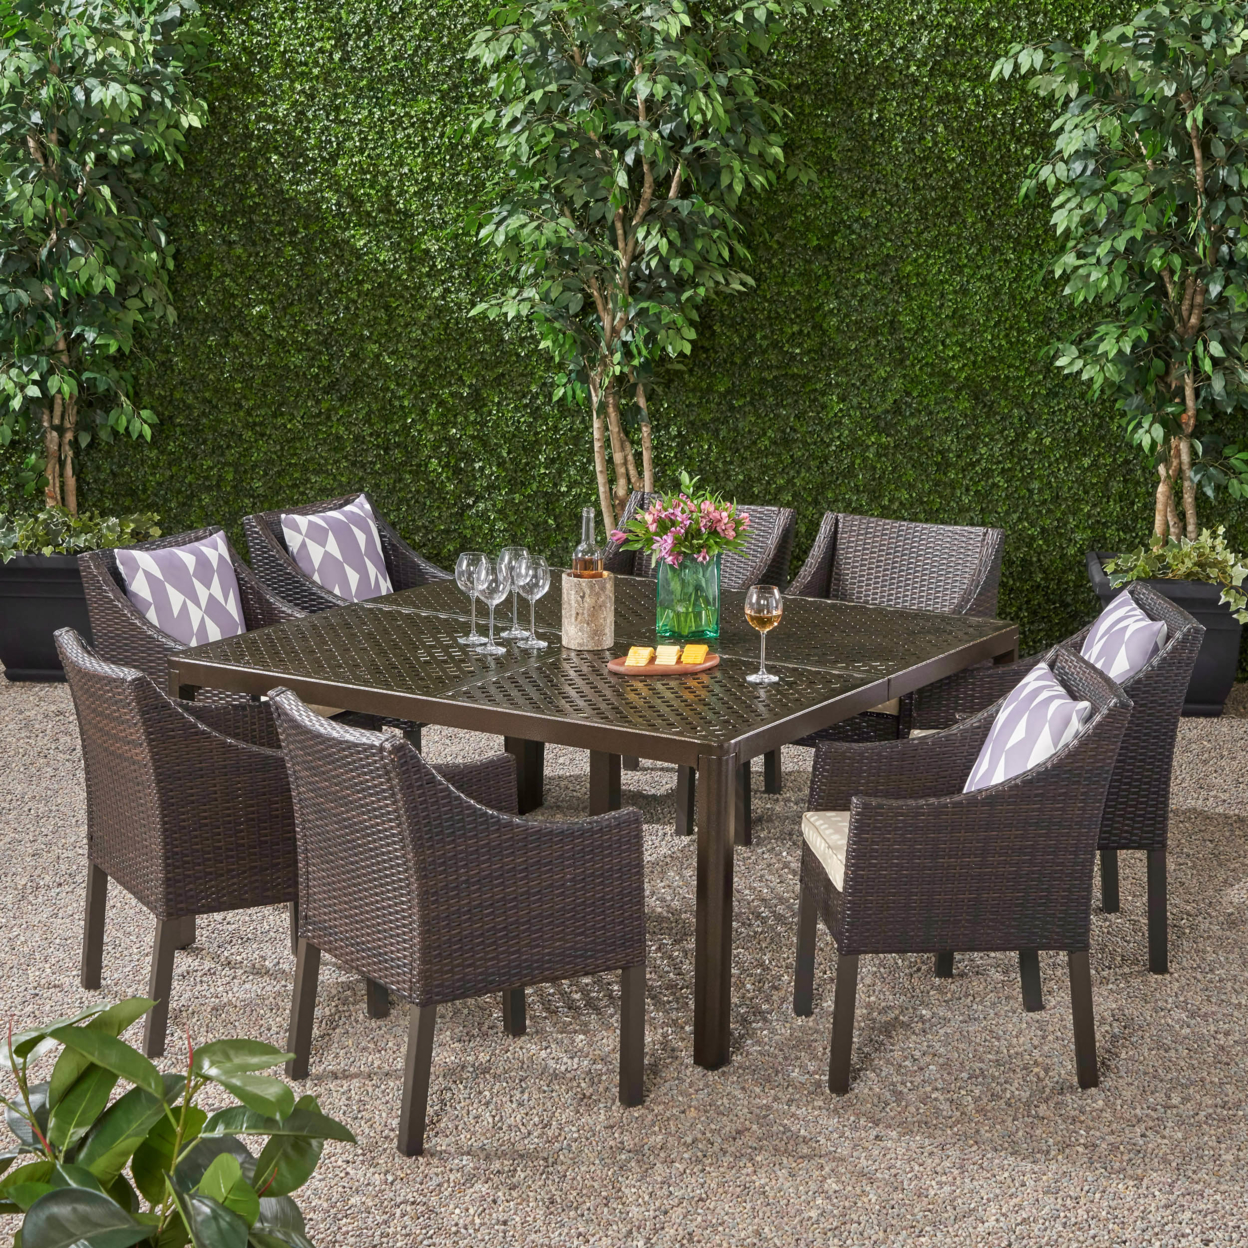 Megan Outdoor Aluminum And Wicker 8 Seater Dining Set - Gloss Black + Multibrown + Beige